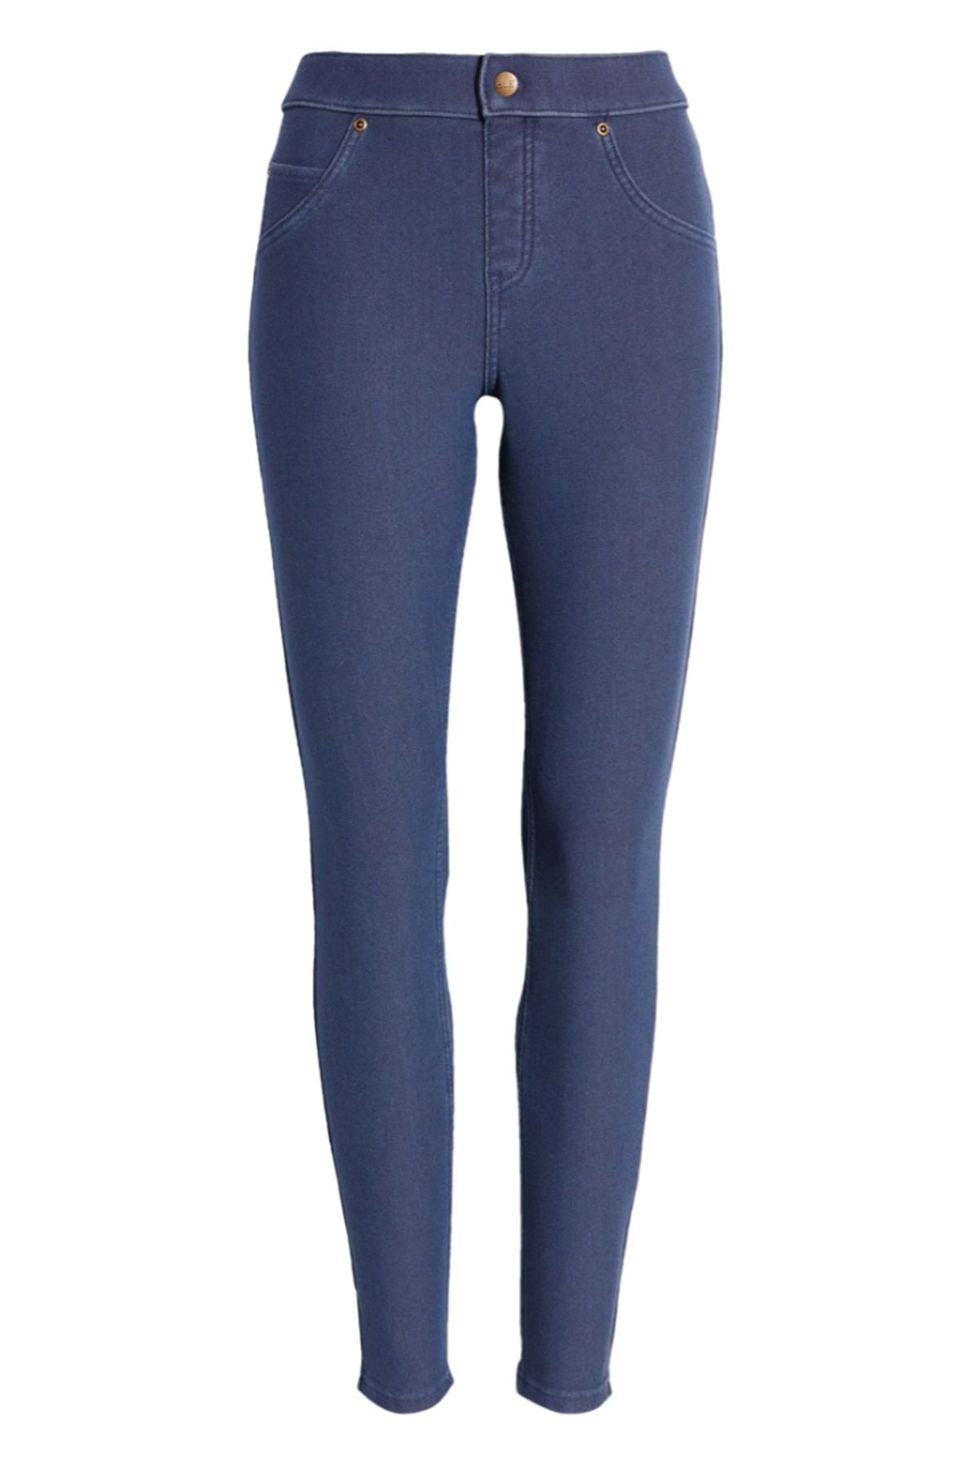 Buy Girls Jeans Fleece Lining-Pack of 1-Blue Online at Best Price